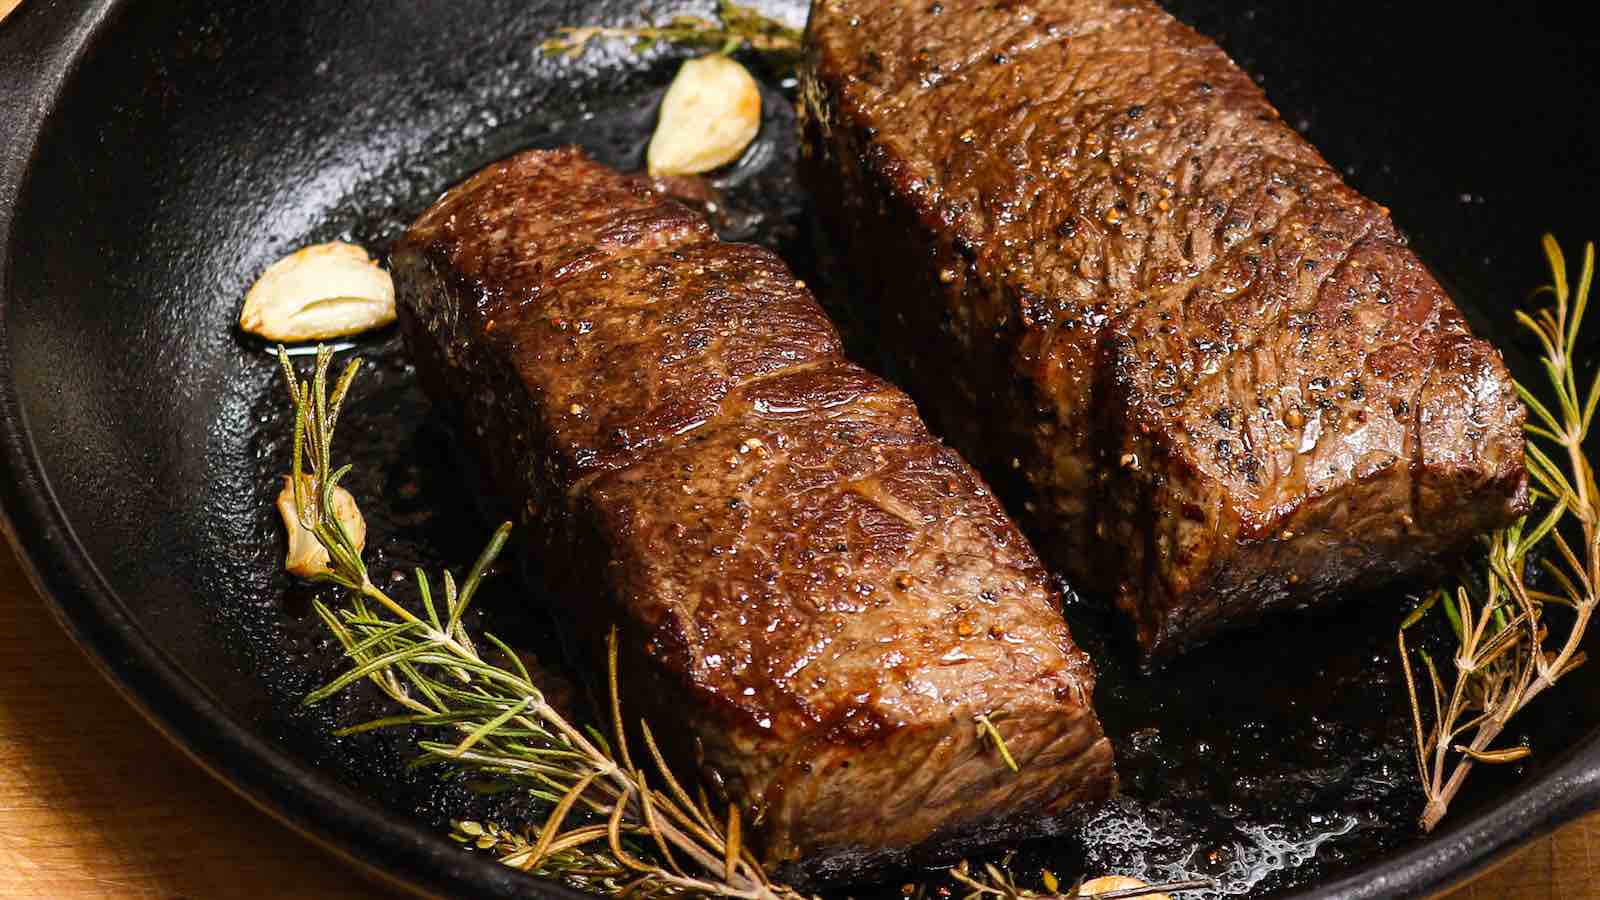 How to Cook Denver Steak in the Oven